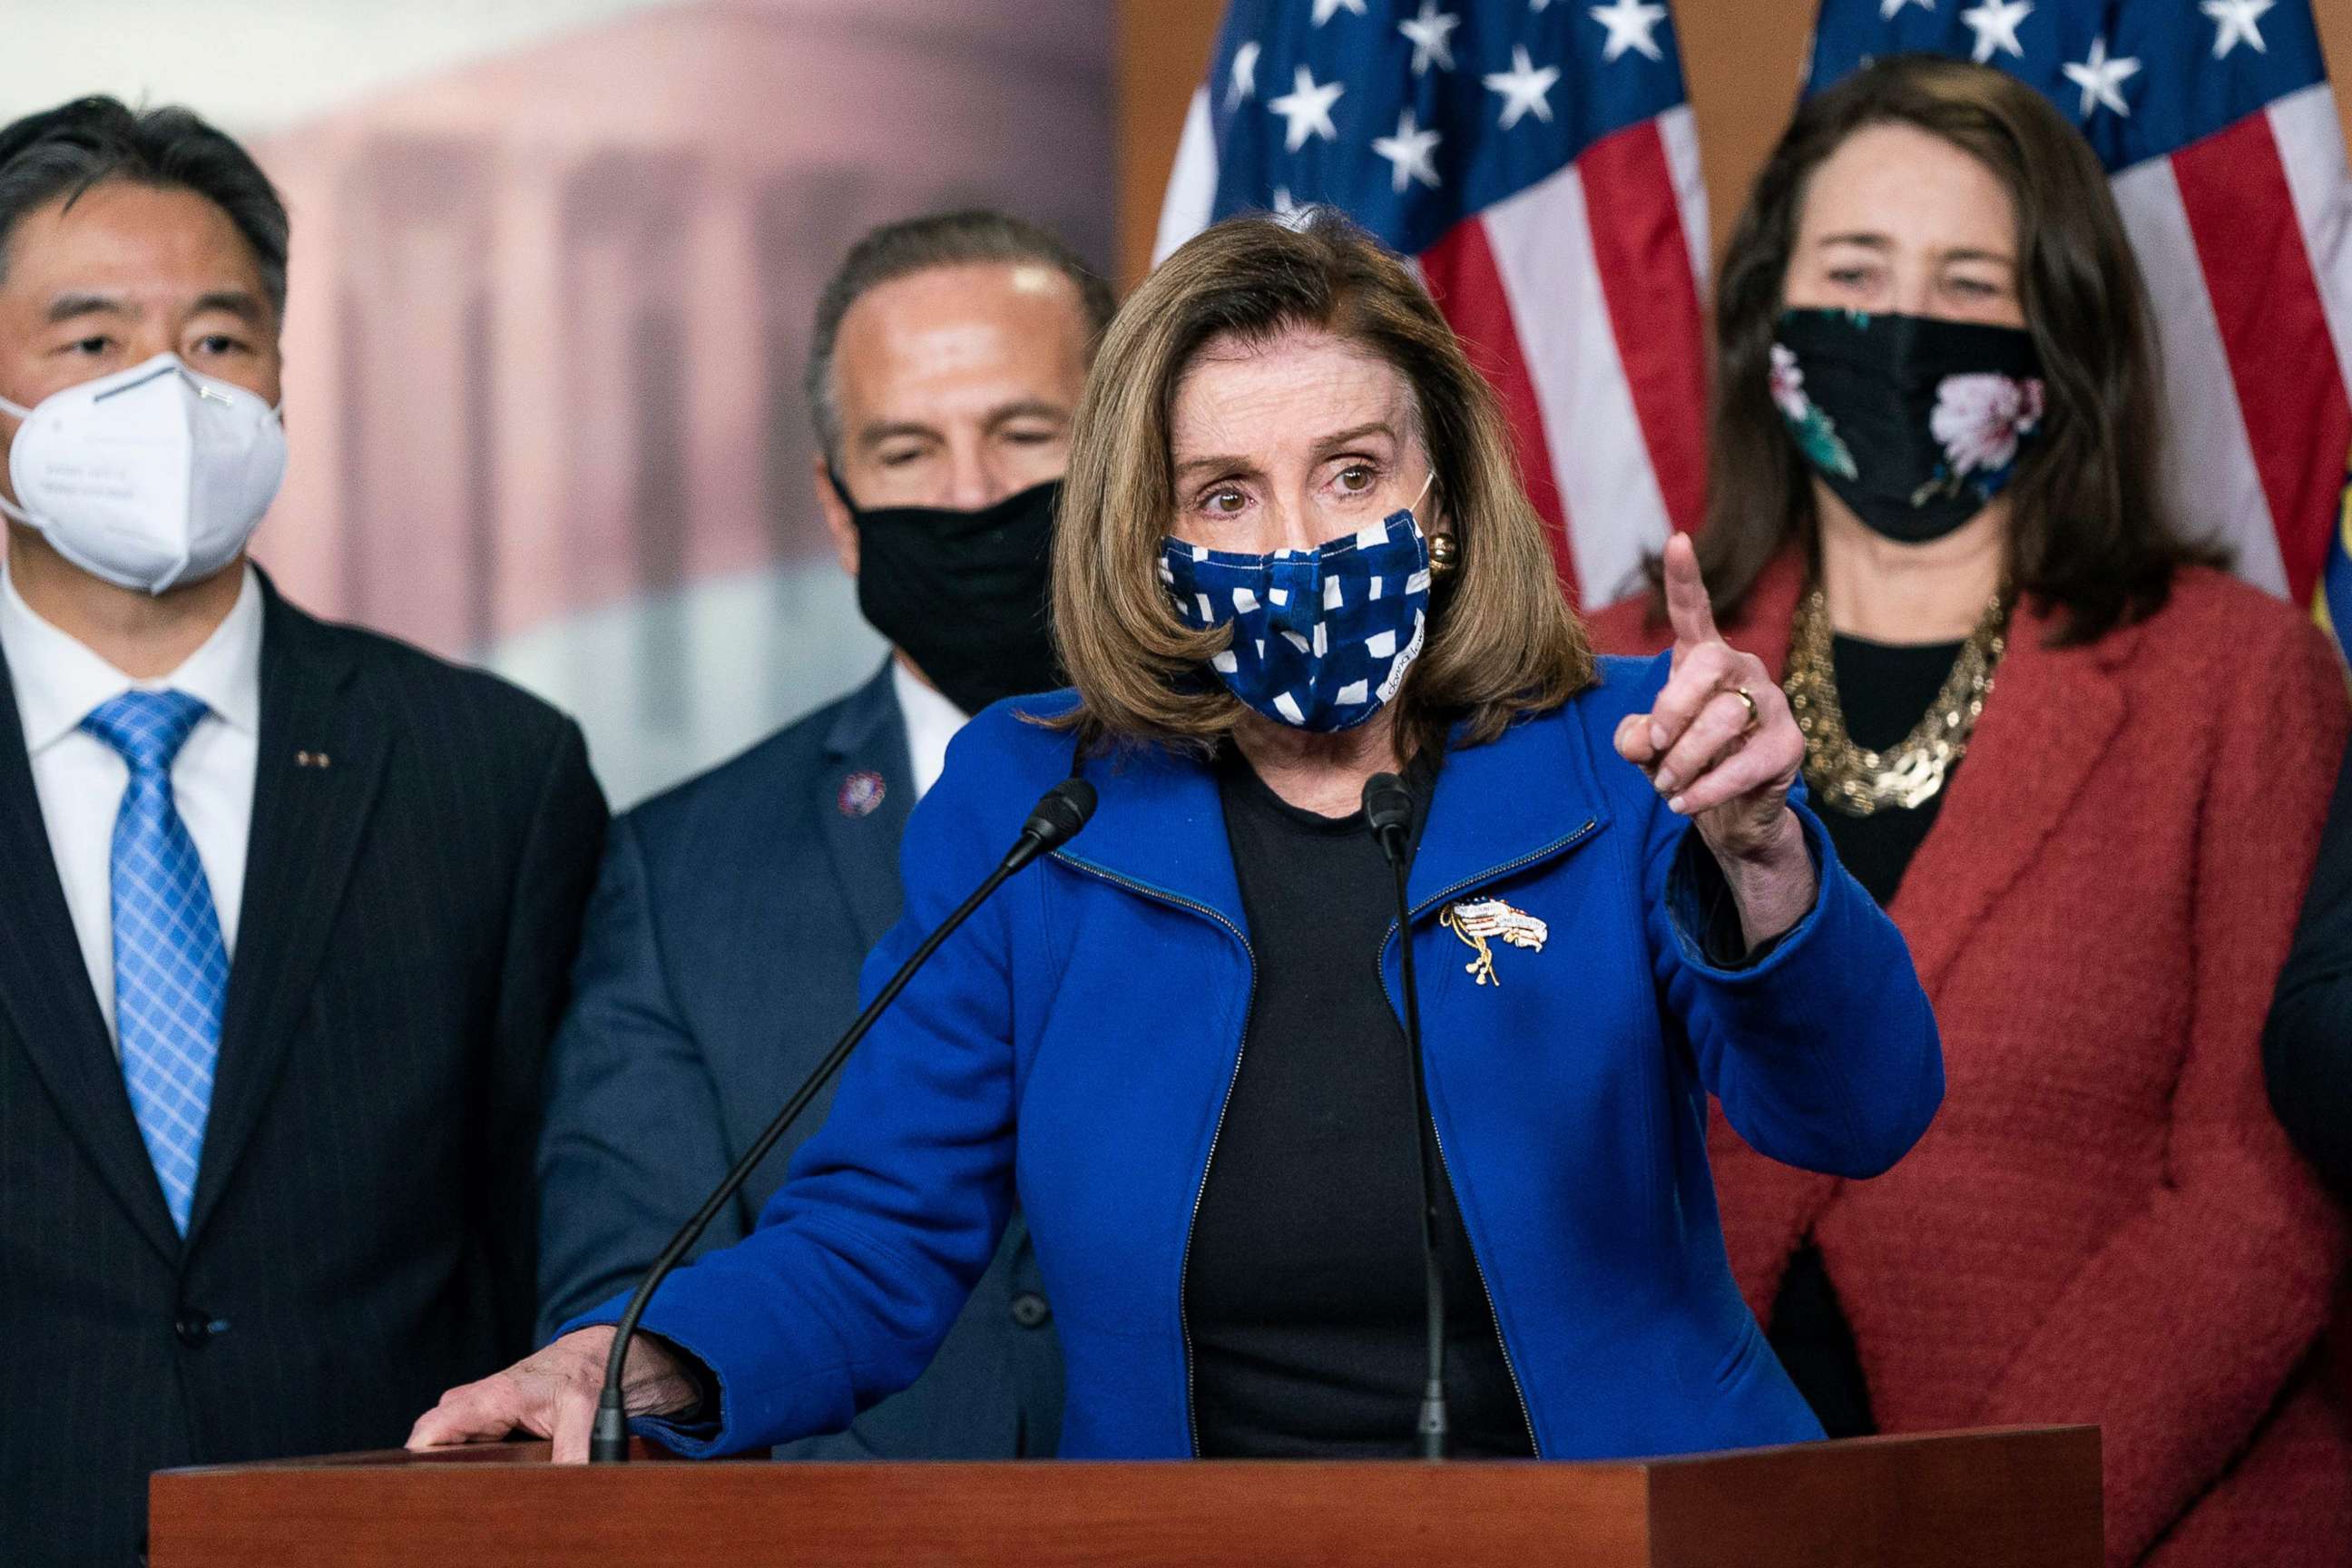 PHOTO: Speaker of the House Nancy Pelosi, with House impeachment managers, speaks to the press after the Senate voted to acquit former President Donald Trump, Feb. 13, 2021, at the U.S. Capitol in Washington, D.C.